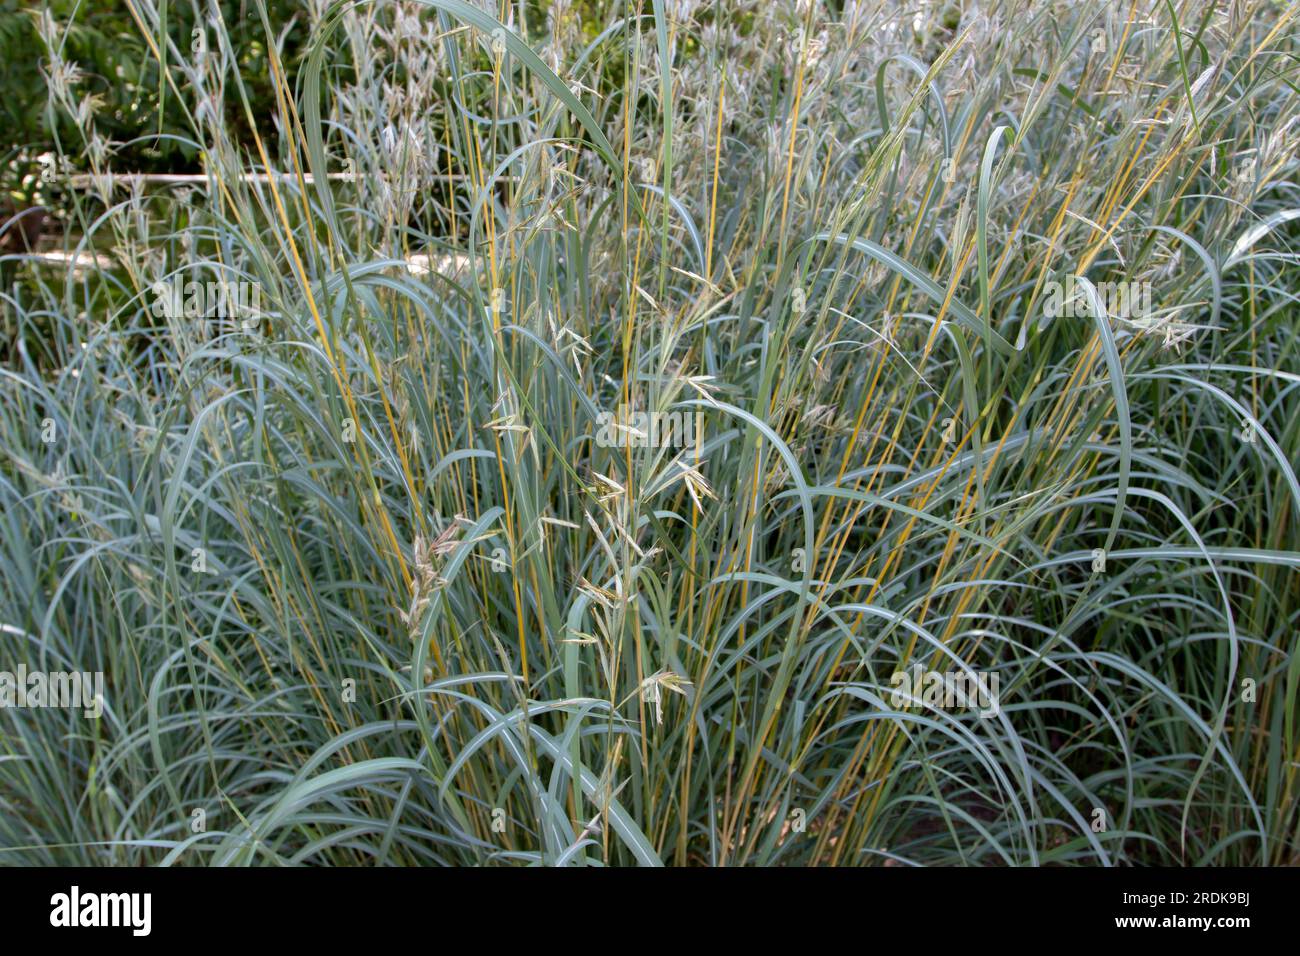 Hyparrhenia tamba ornamental grass plant with flowers close-up. Inflorescence branches into twin spikes of paired spikelets. Stock Photo